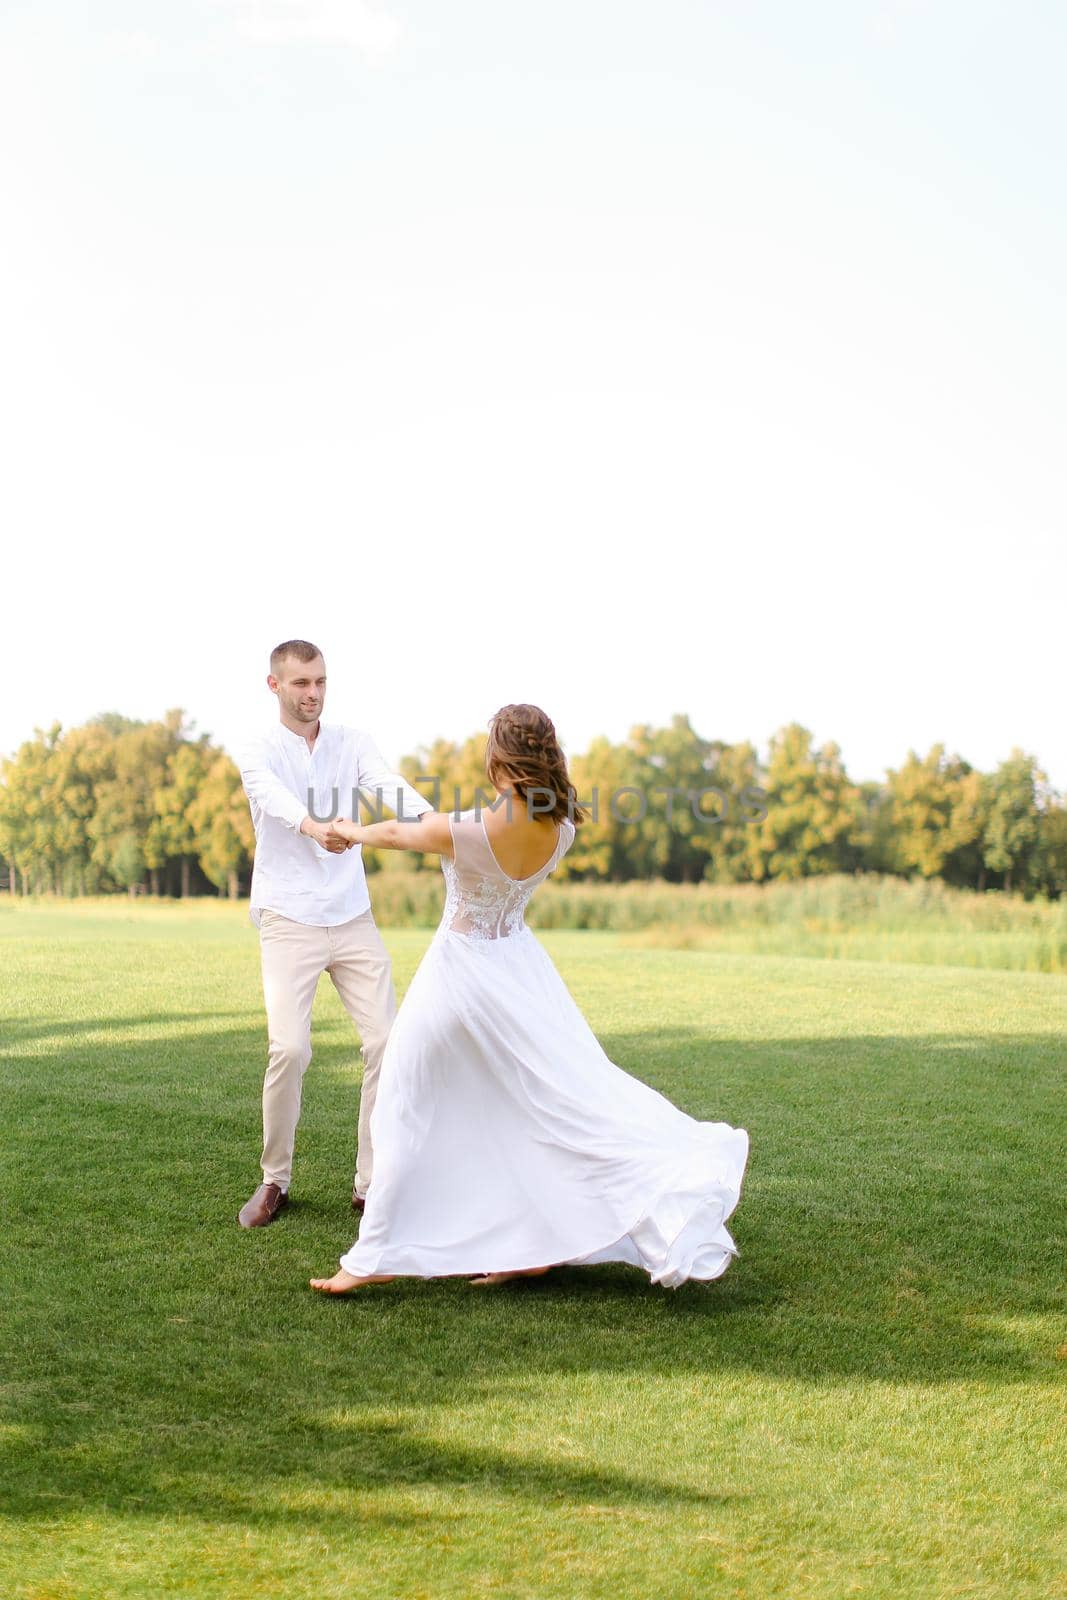 Happy groom and bride dress dancing on grass. Concept of wedding photo session on open air and nature.